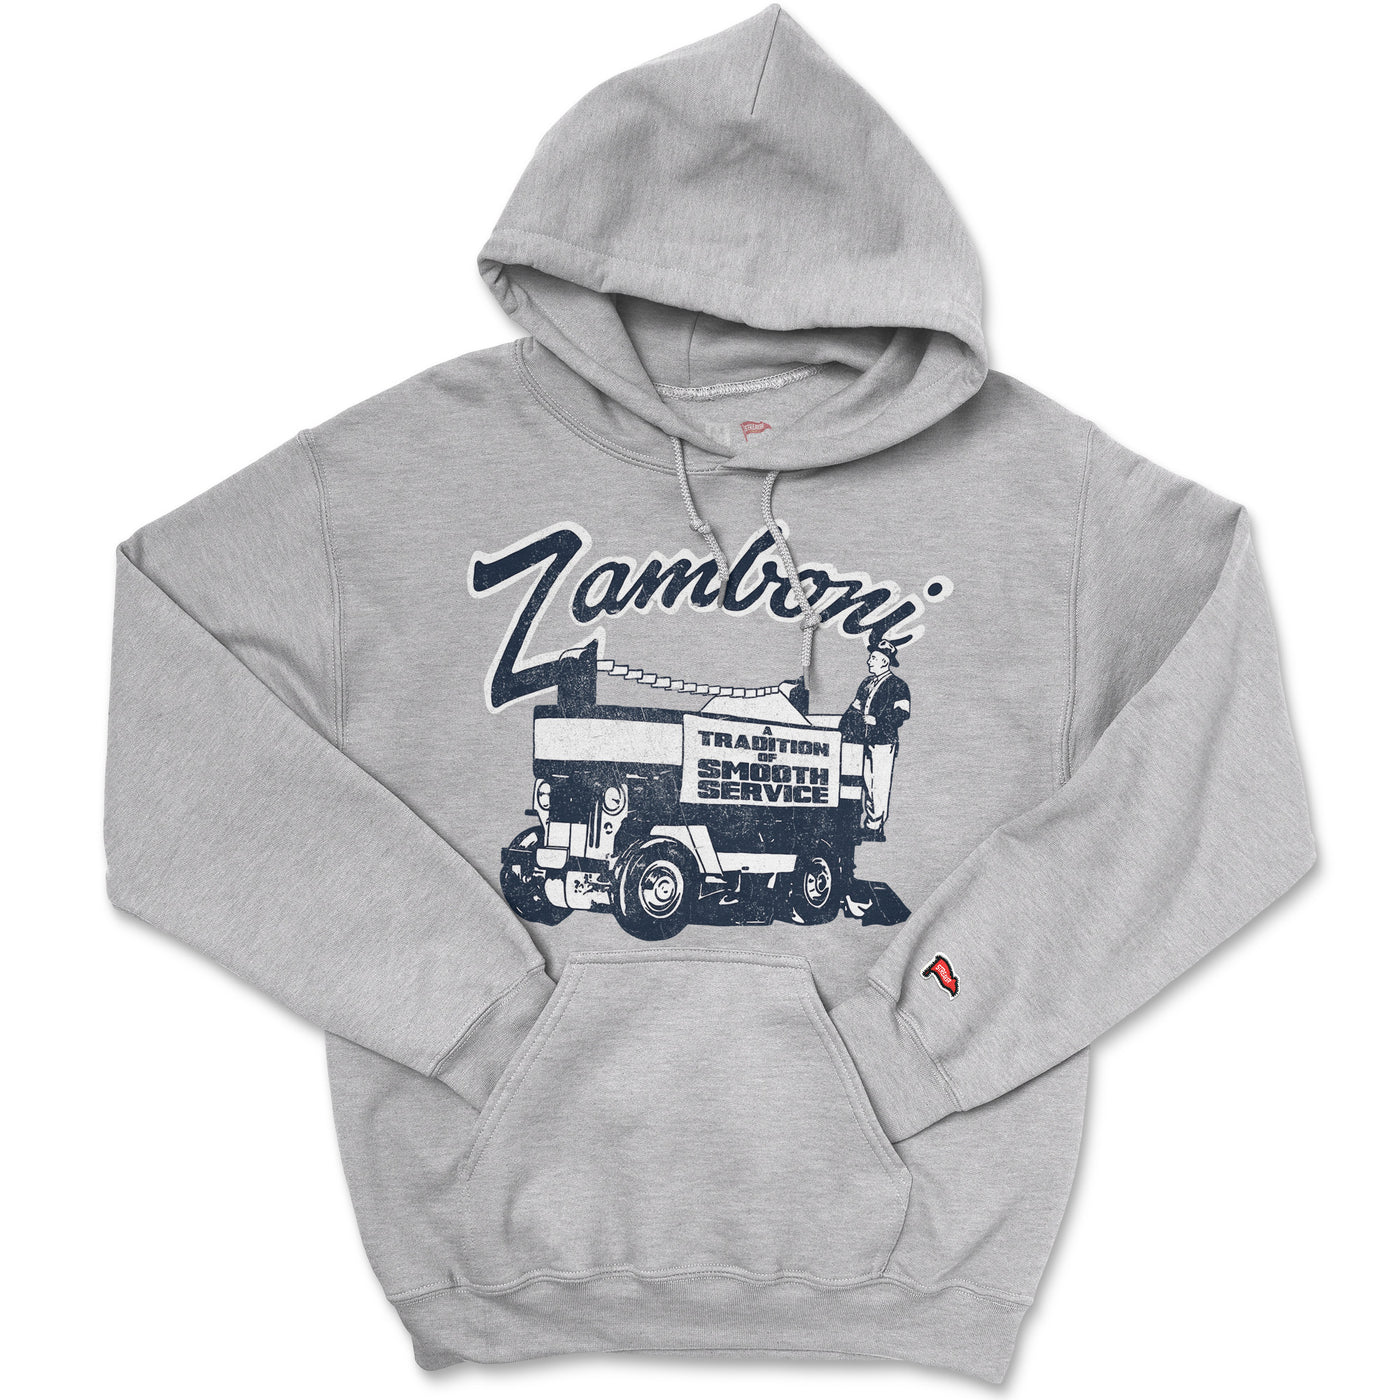 Zamboni A Tradition of Smooth Service Hoodie - Streaker Sports